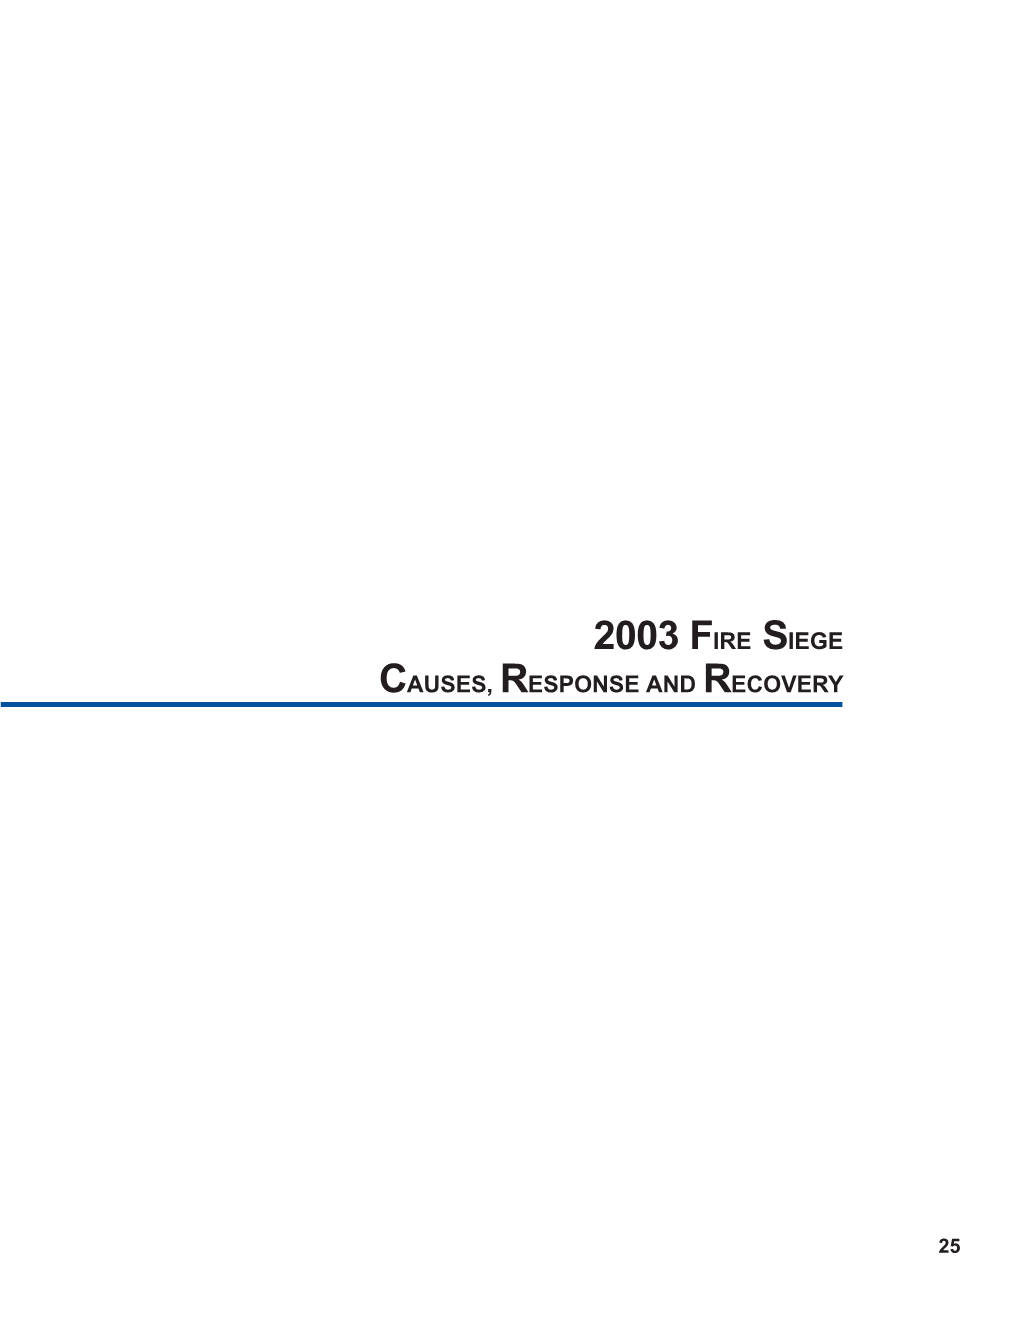 2003 Fire Siege Causes, Response and Recovery